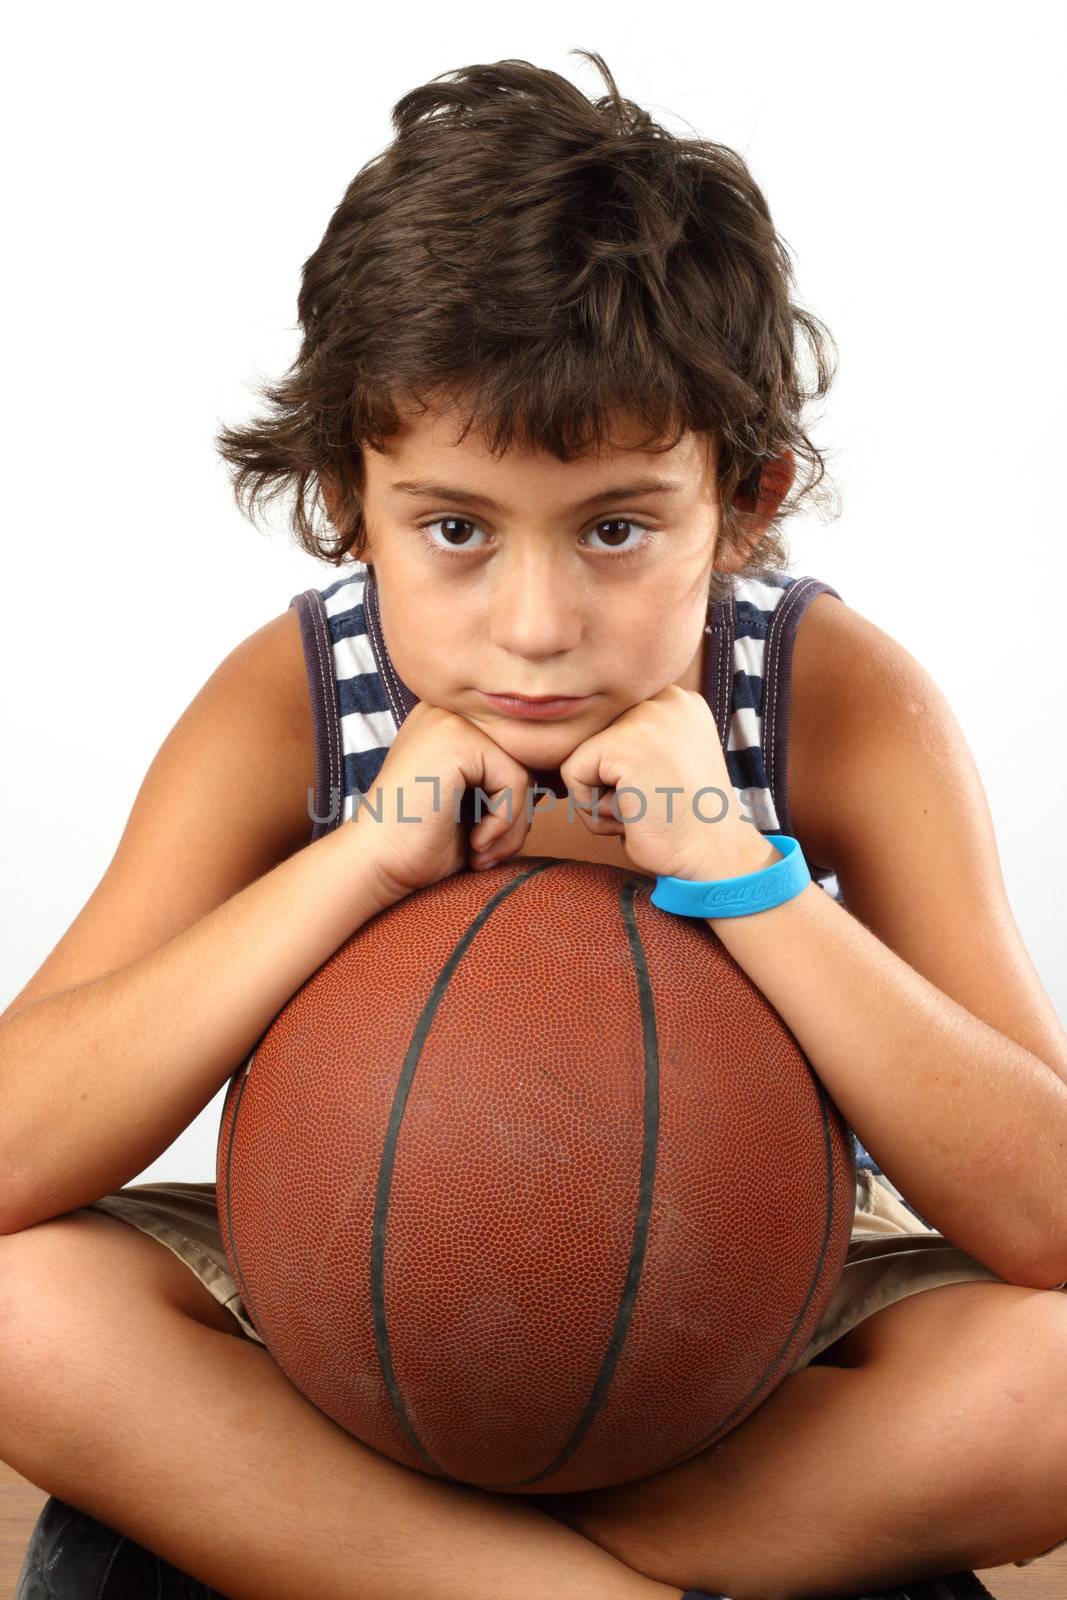 Young cute boy with basketball ball over white